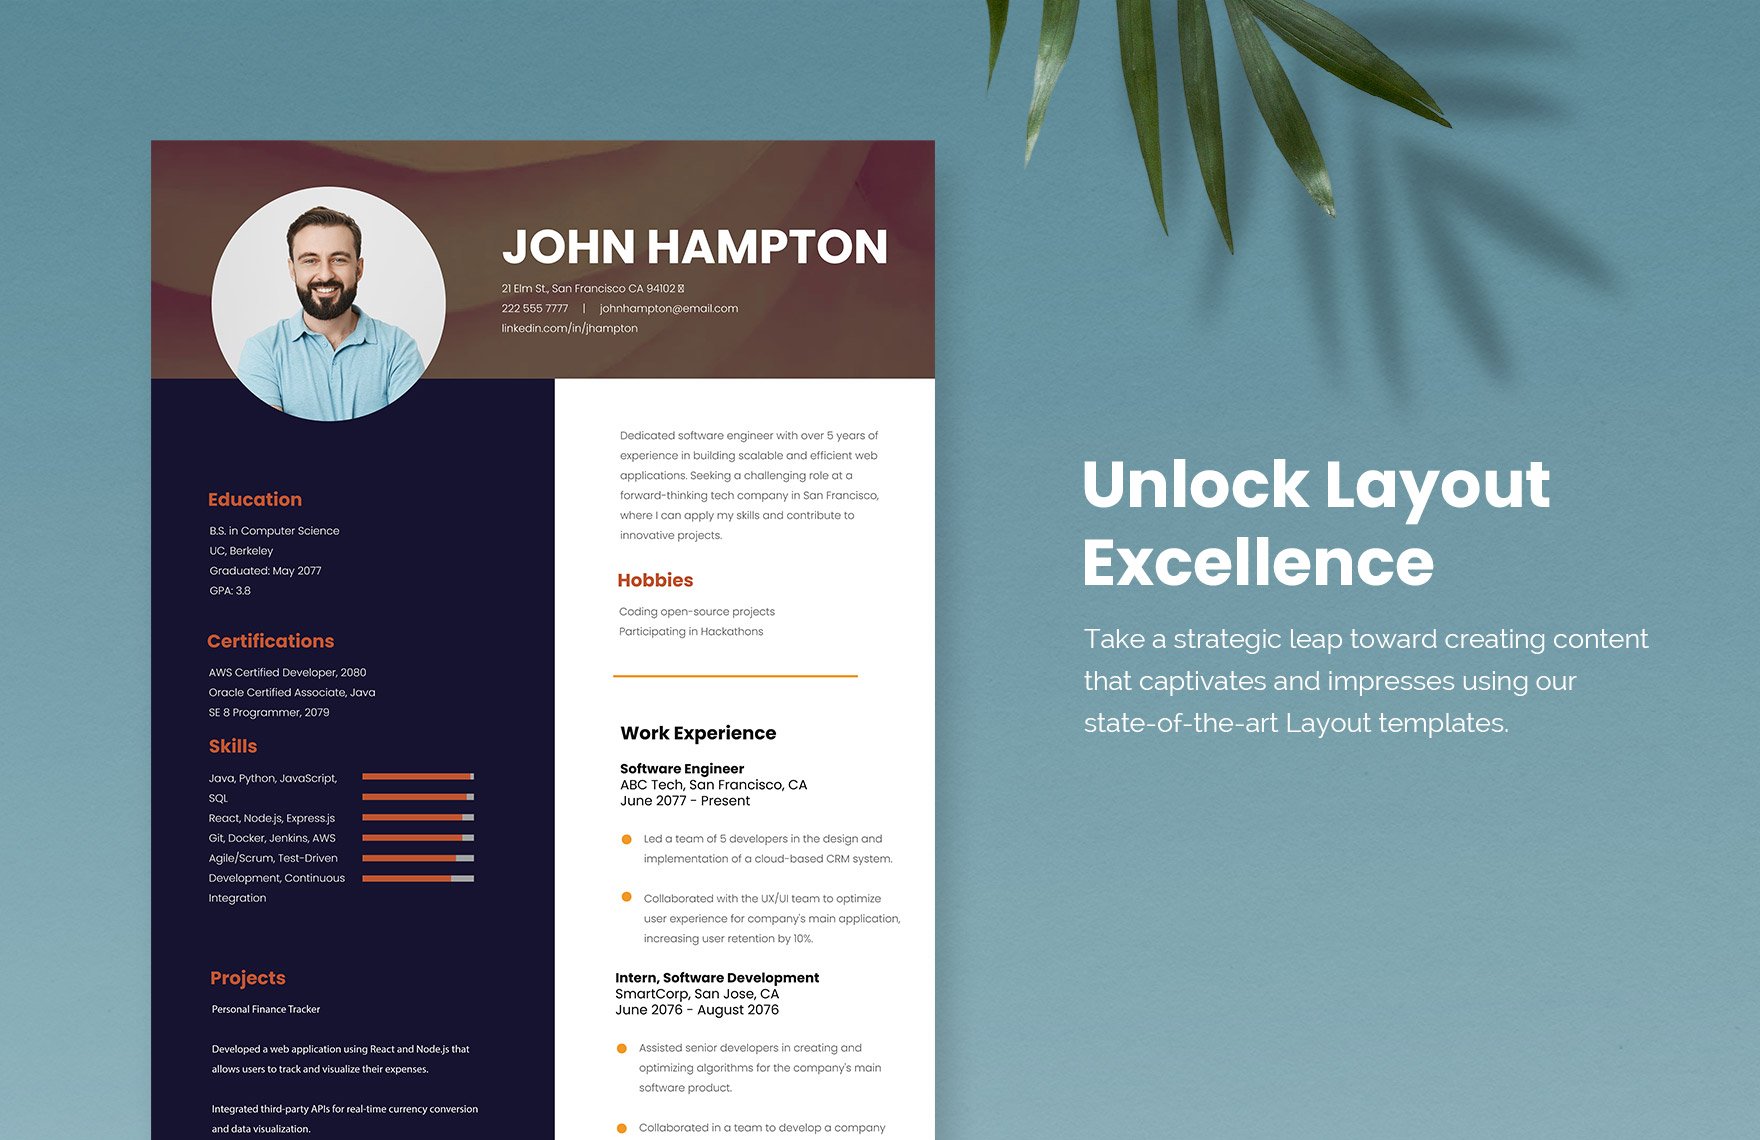 Resume Layout Template